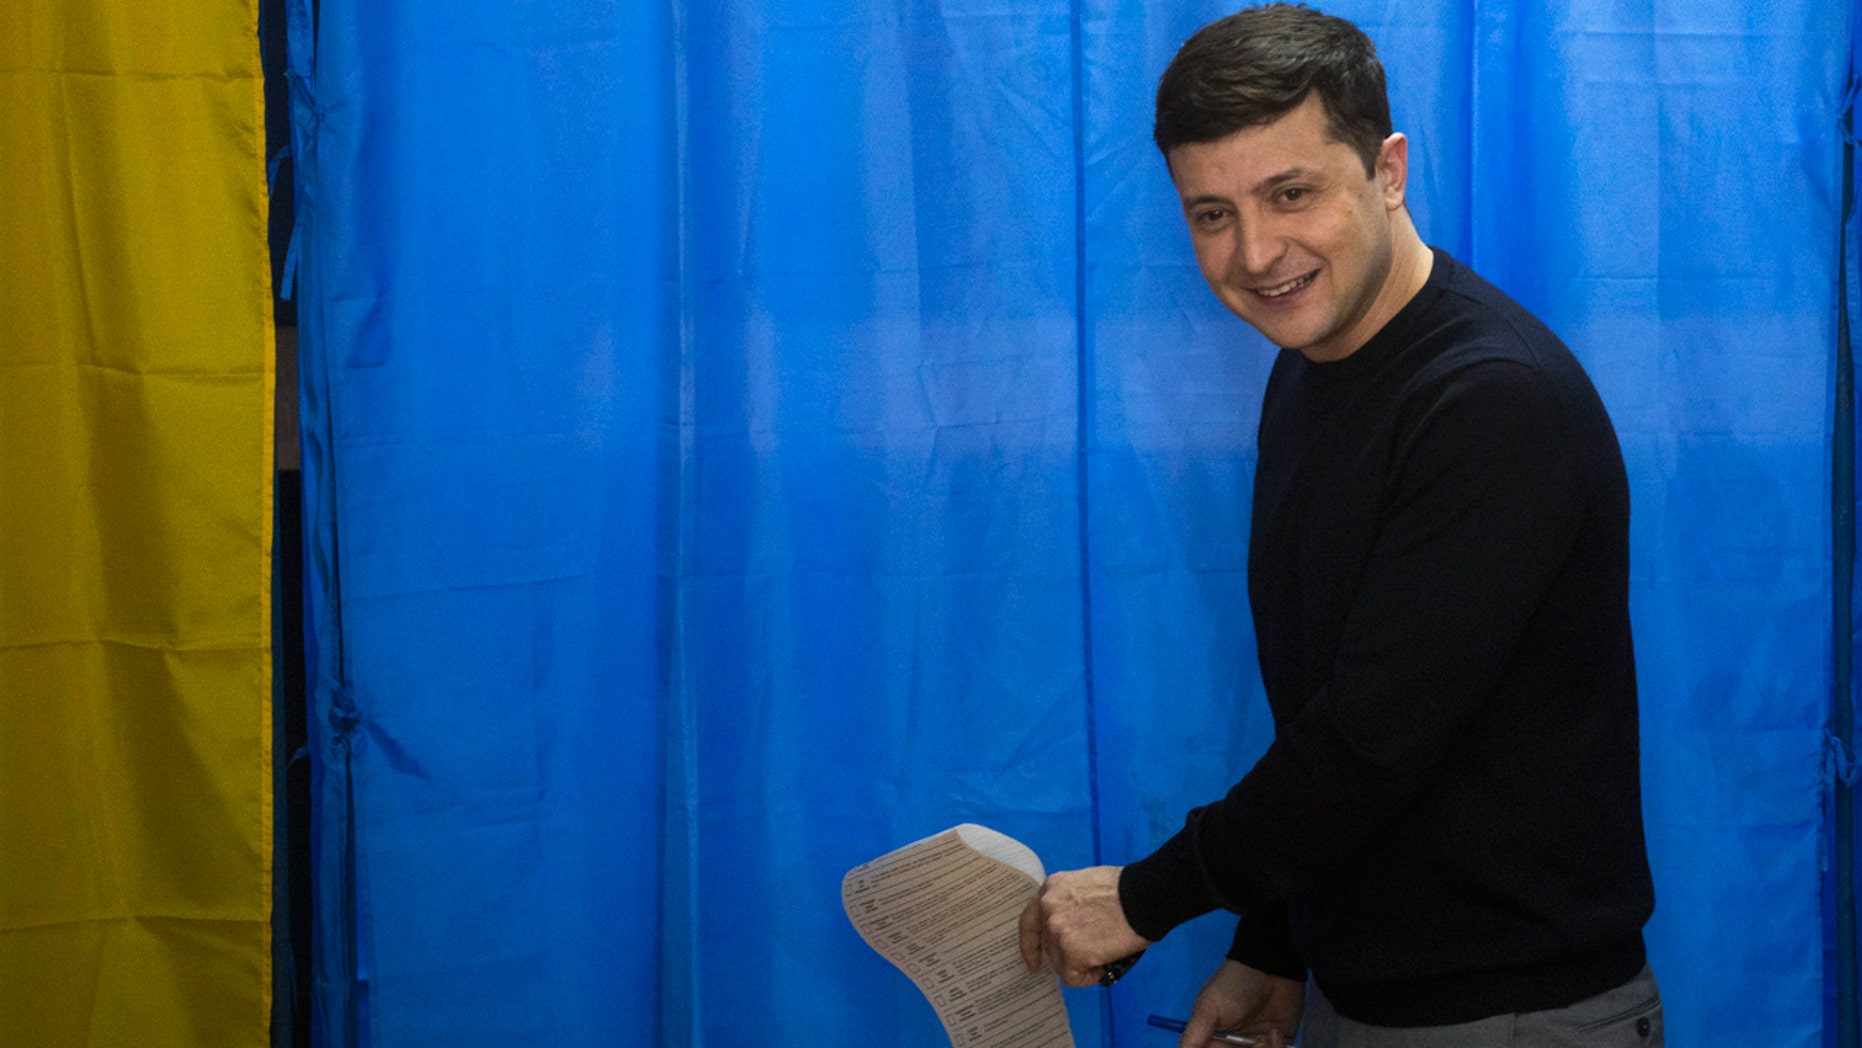 Ukrainian comedian and presidential candidate Volodymyr Zelenskiy holding his ballot before voting in the presidential elections in Kiev, Ukraine, on Sunday. (AP Photo/Emilio Morenatti)